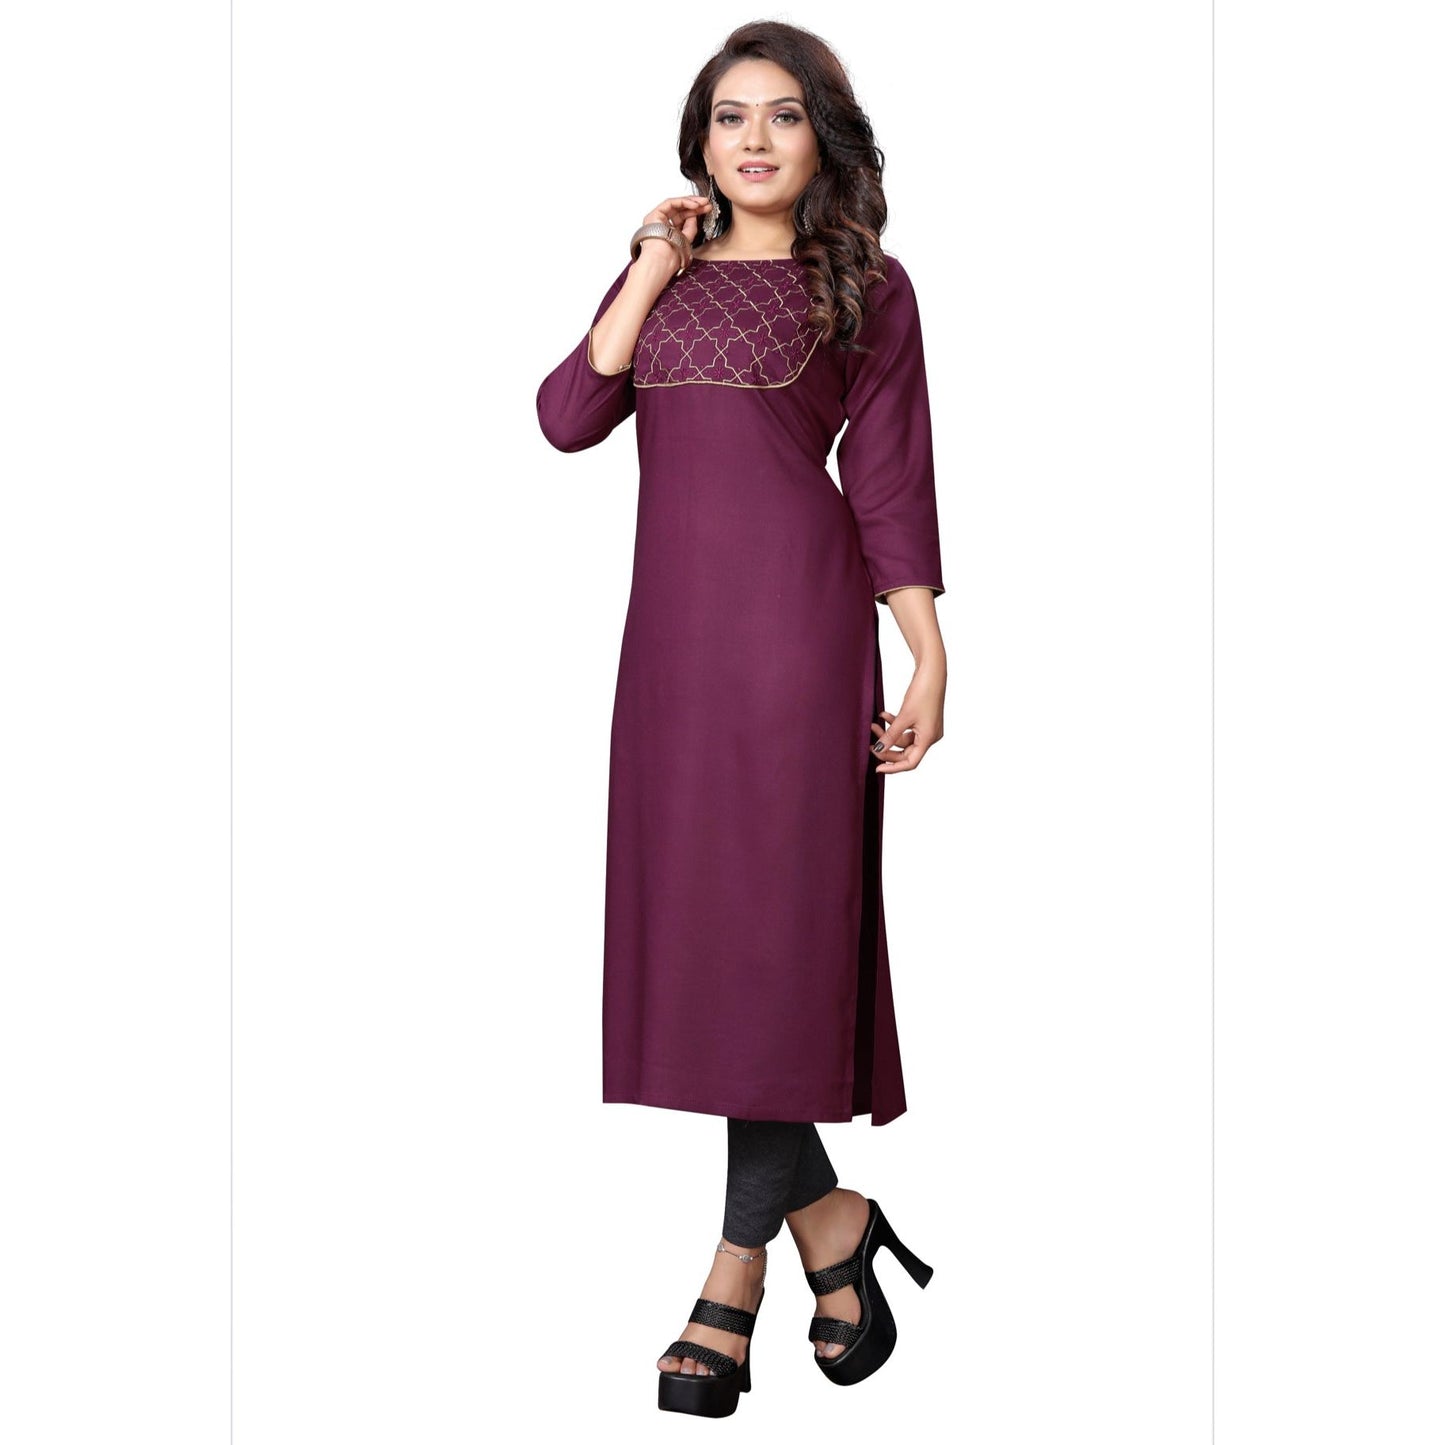 Plum colored Indian Tunic Top for women with Delicate Gold Piping